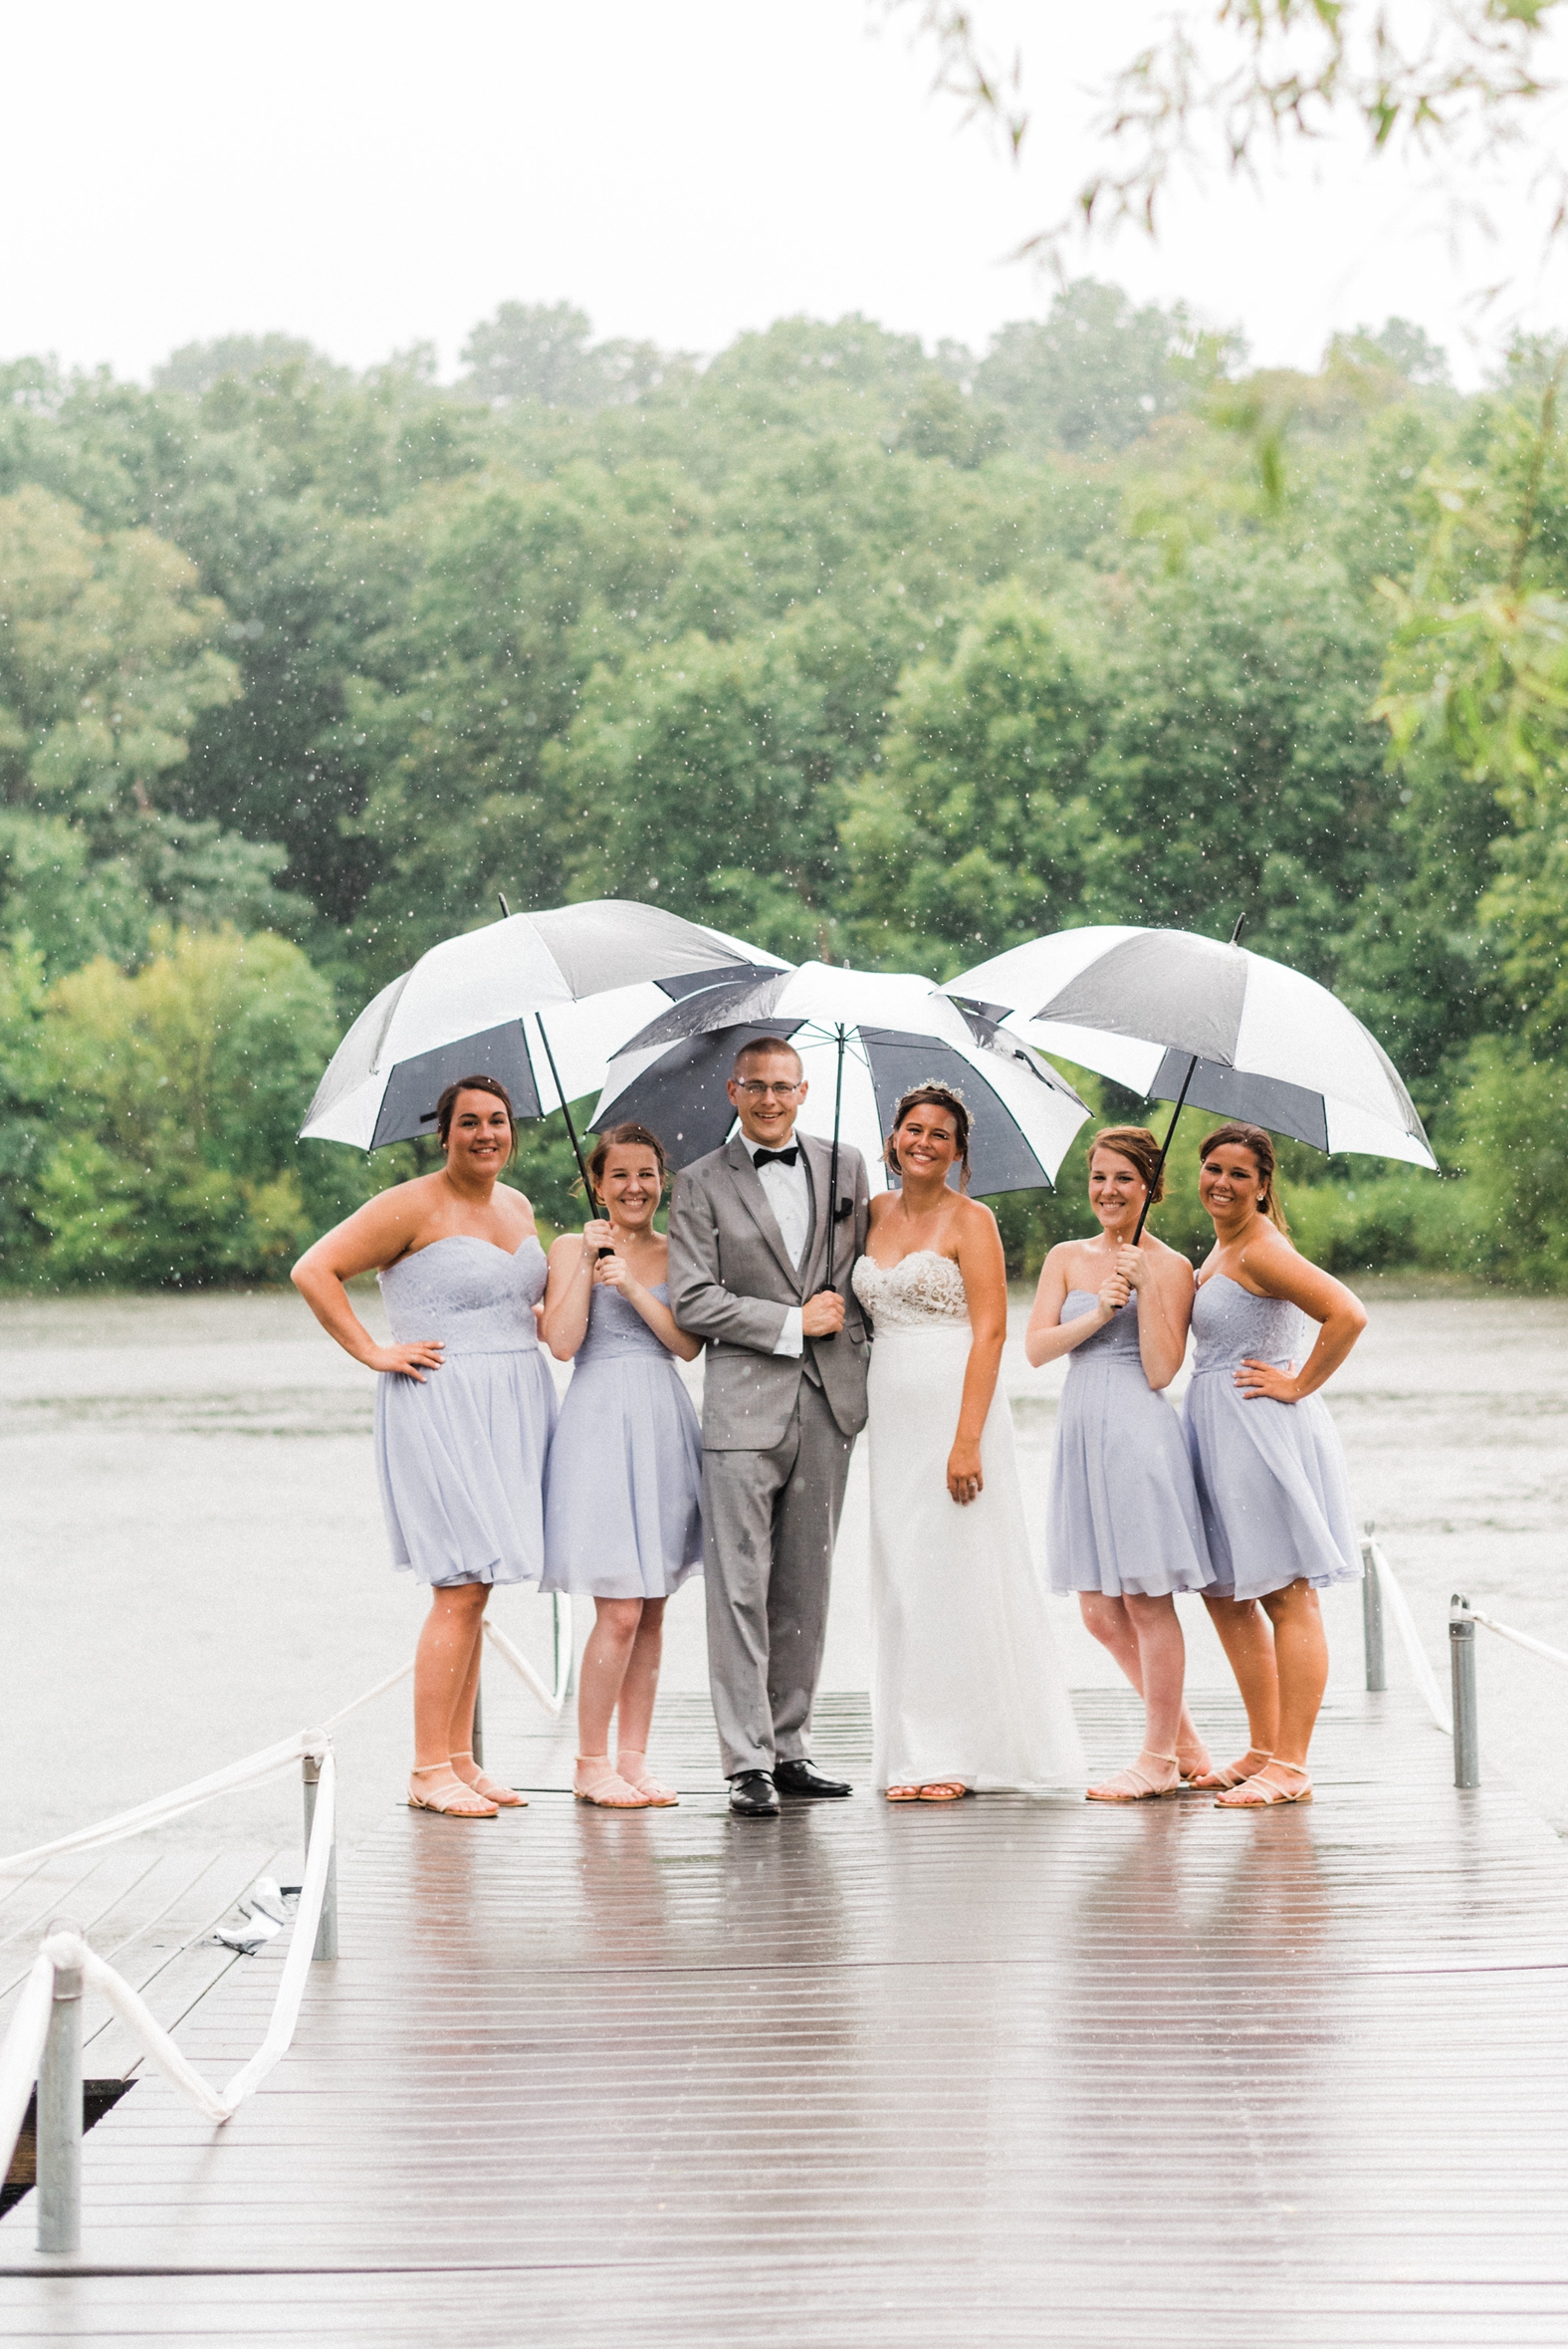 Bride and bridesmaids in rain on dock with black and white umbrellas. Groomsman in gray suit with black tie.